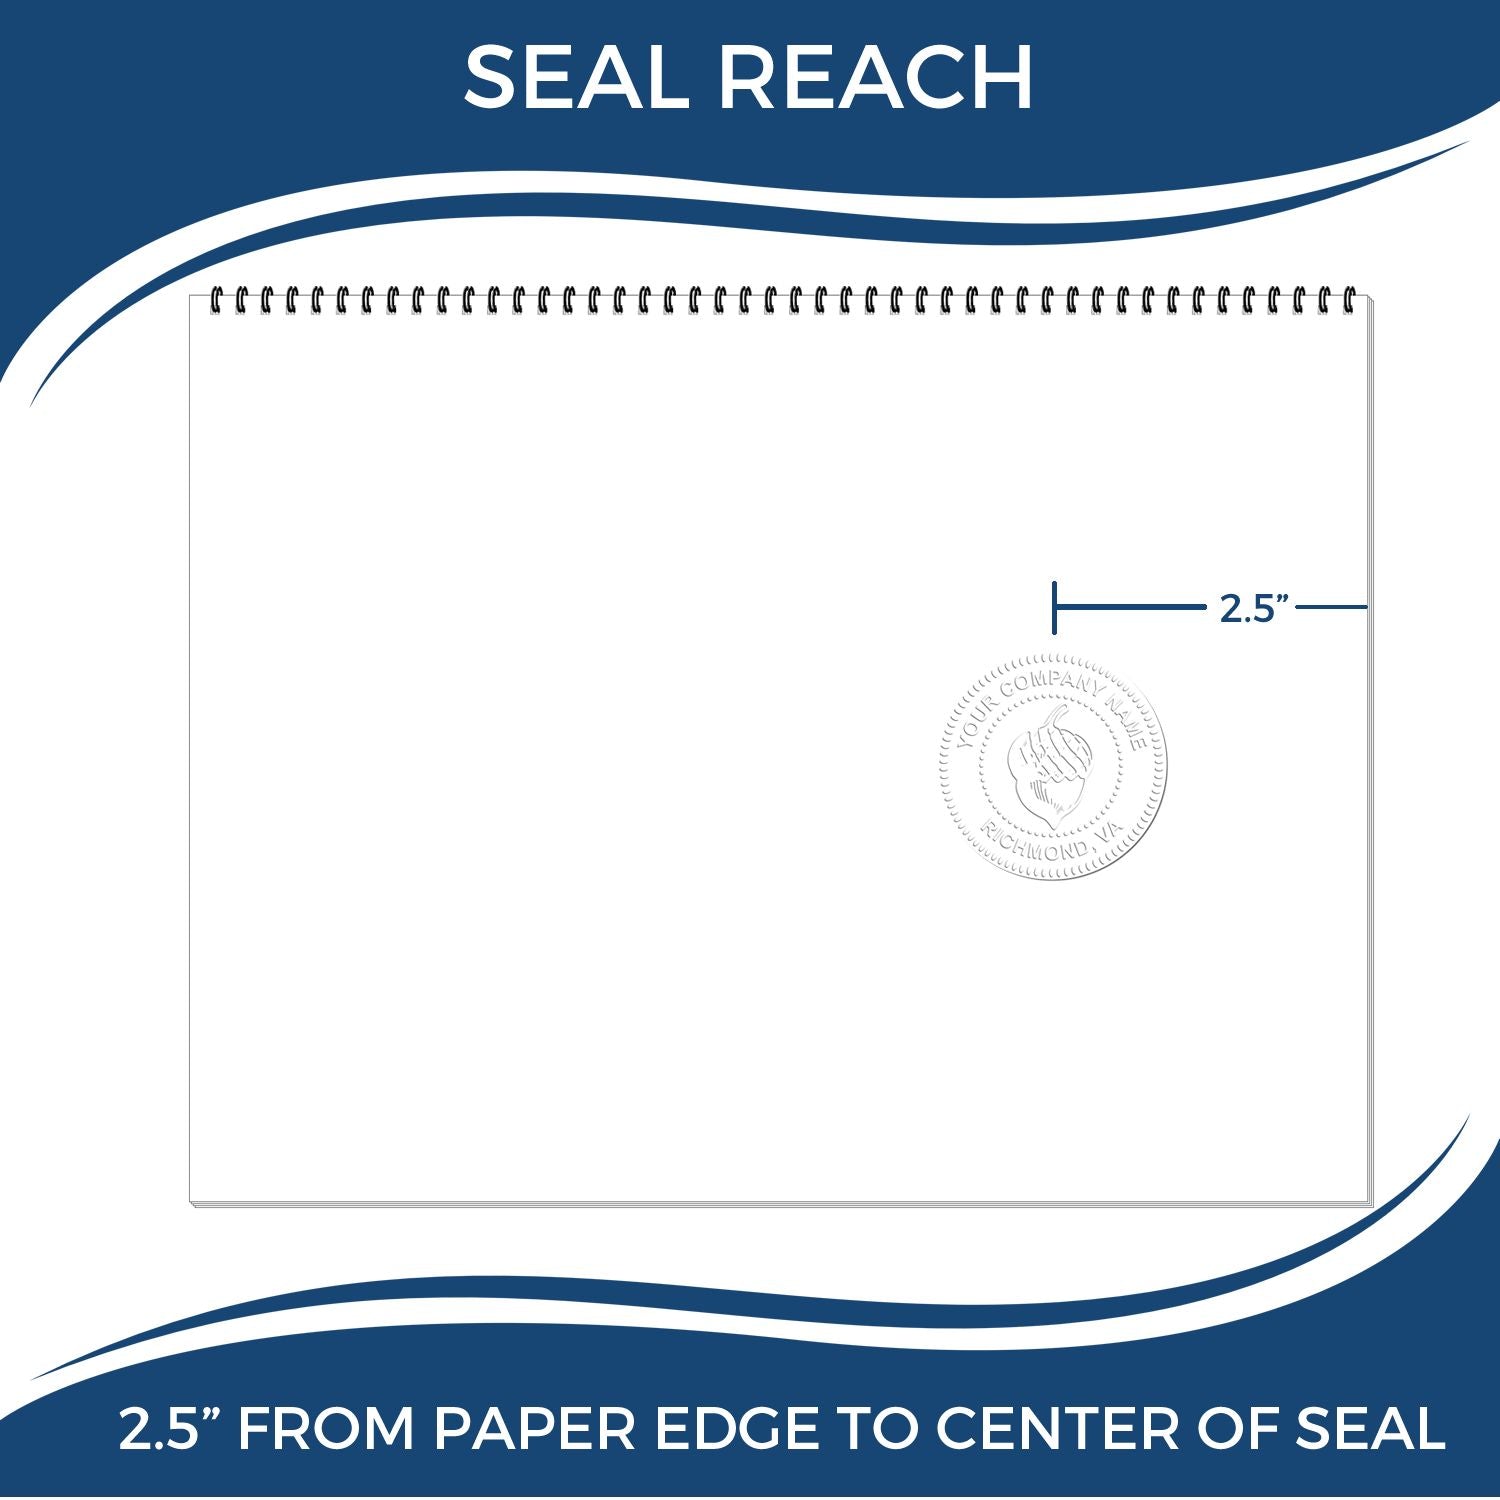 An infographic showing the seal reach which is represented by a ruler and a miniature seal image of the Heavy Duty Cast Iron Hawaii Architect Embosser